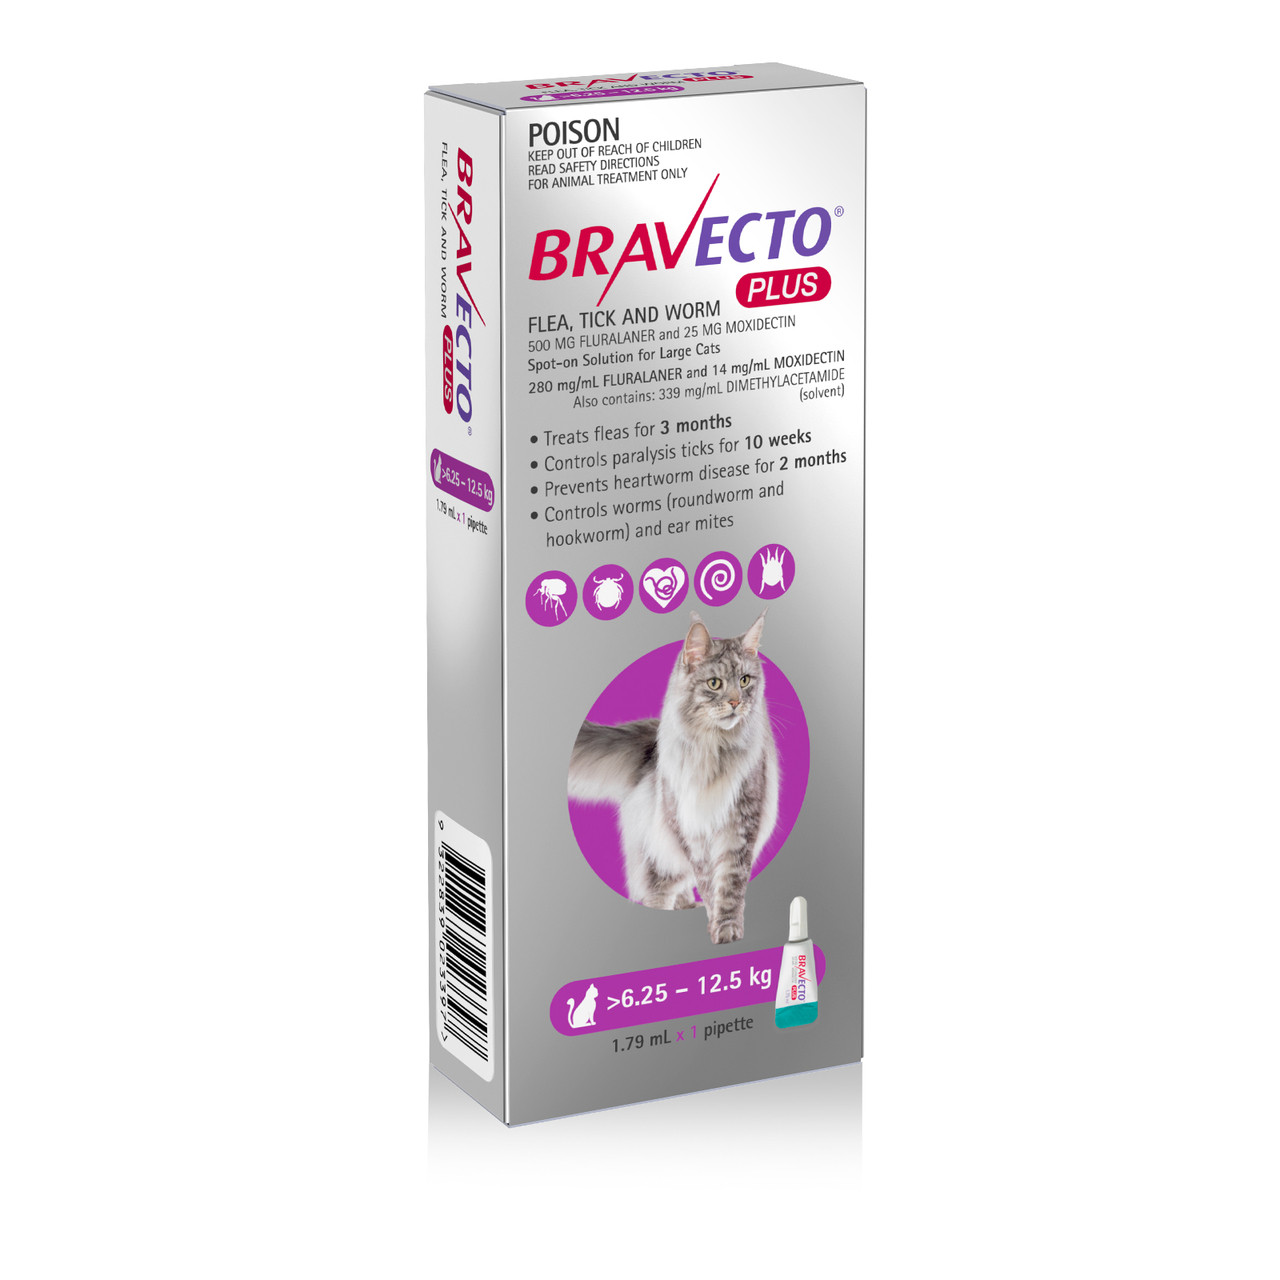 Bravecto PLUS Topical Solution For Cats Lbs Kg) Purple